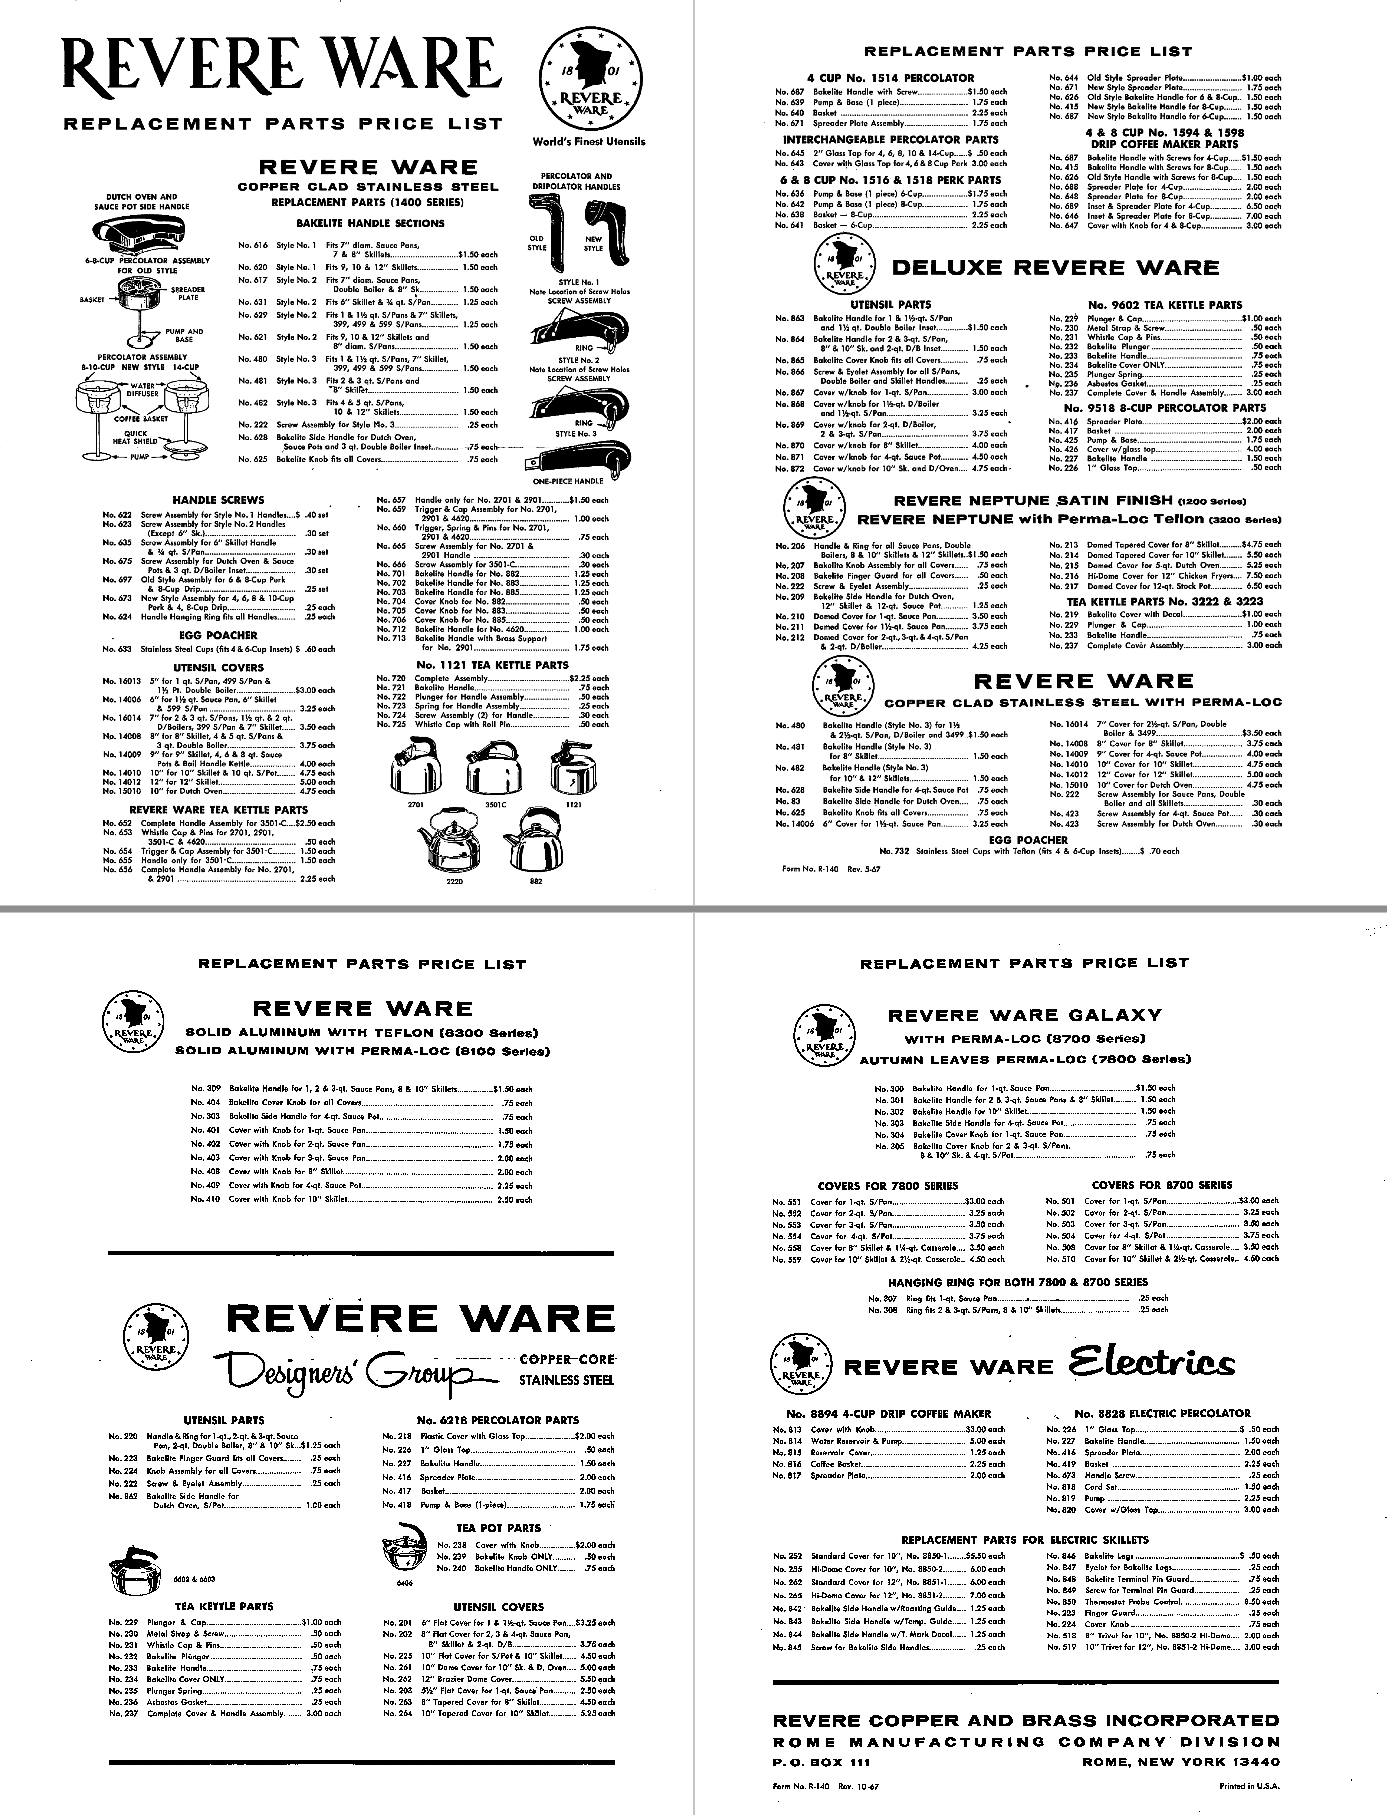 The history and future of Revere Ware replacement parts - Revere